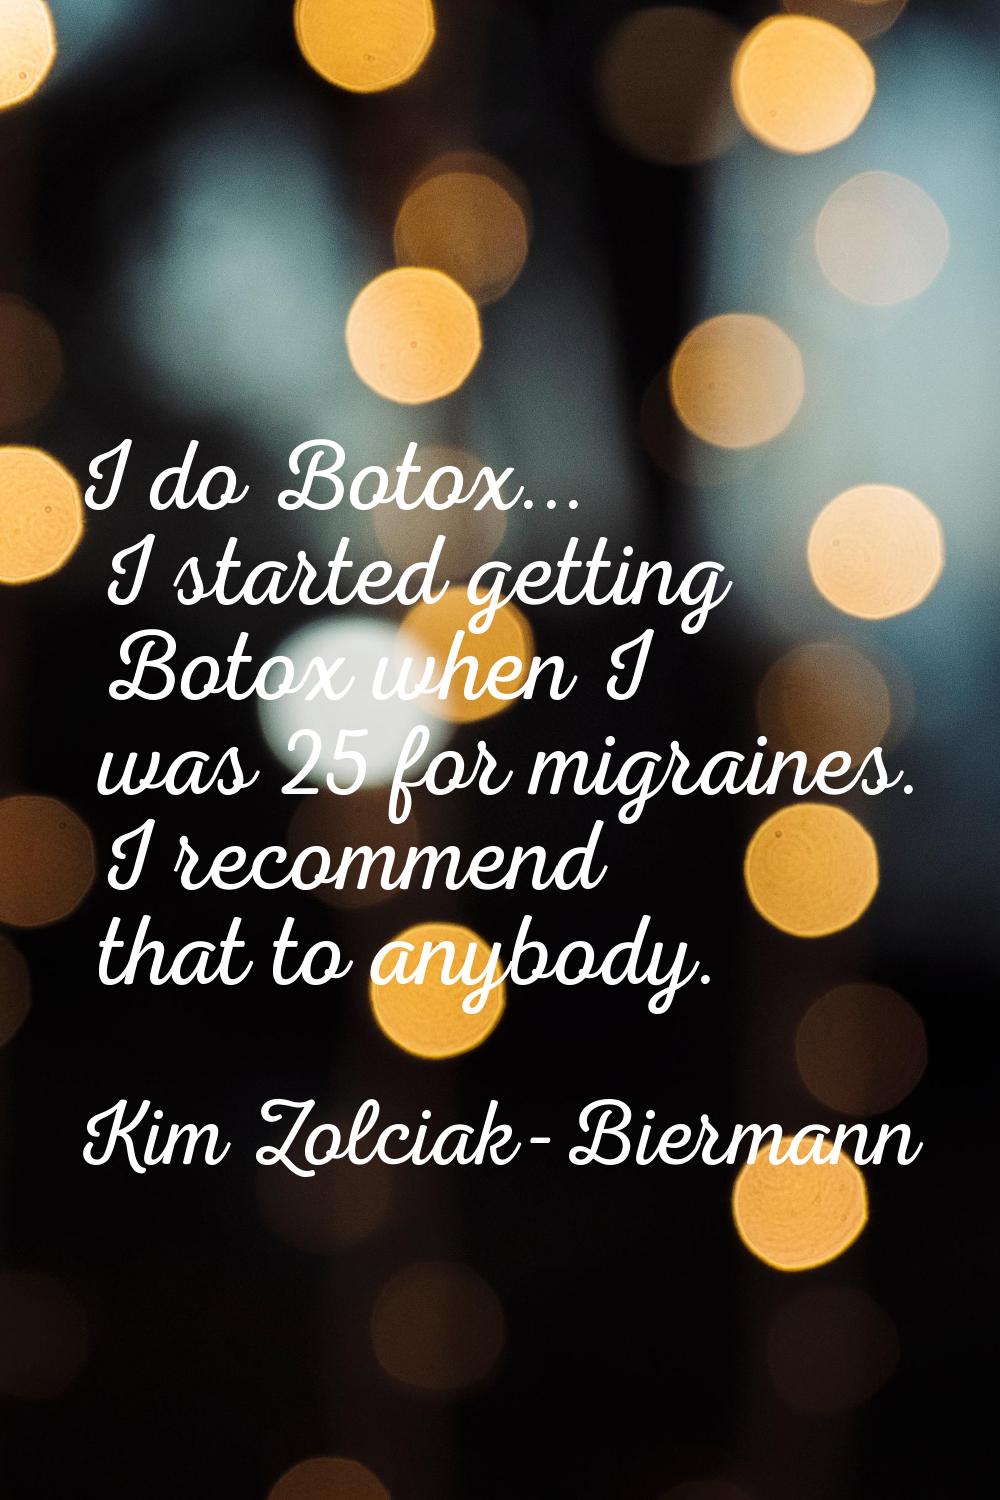 I do Botox... I started getting Botox when I was 25 for migraines. I recommend that to anybody.